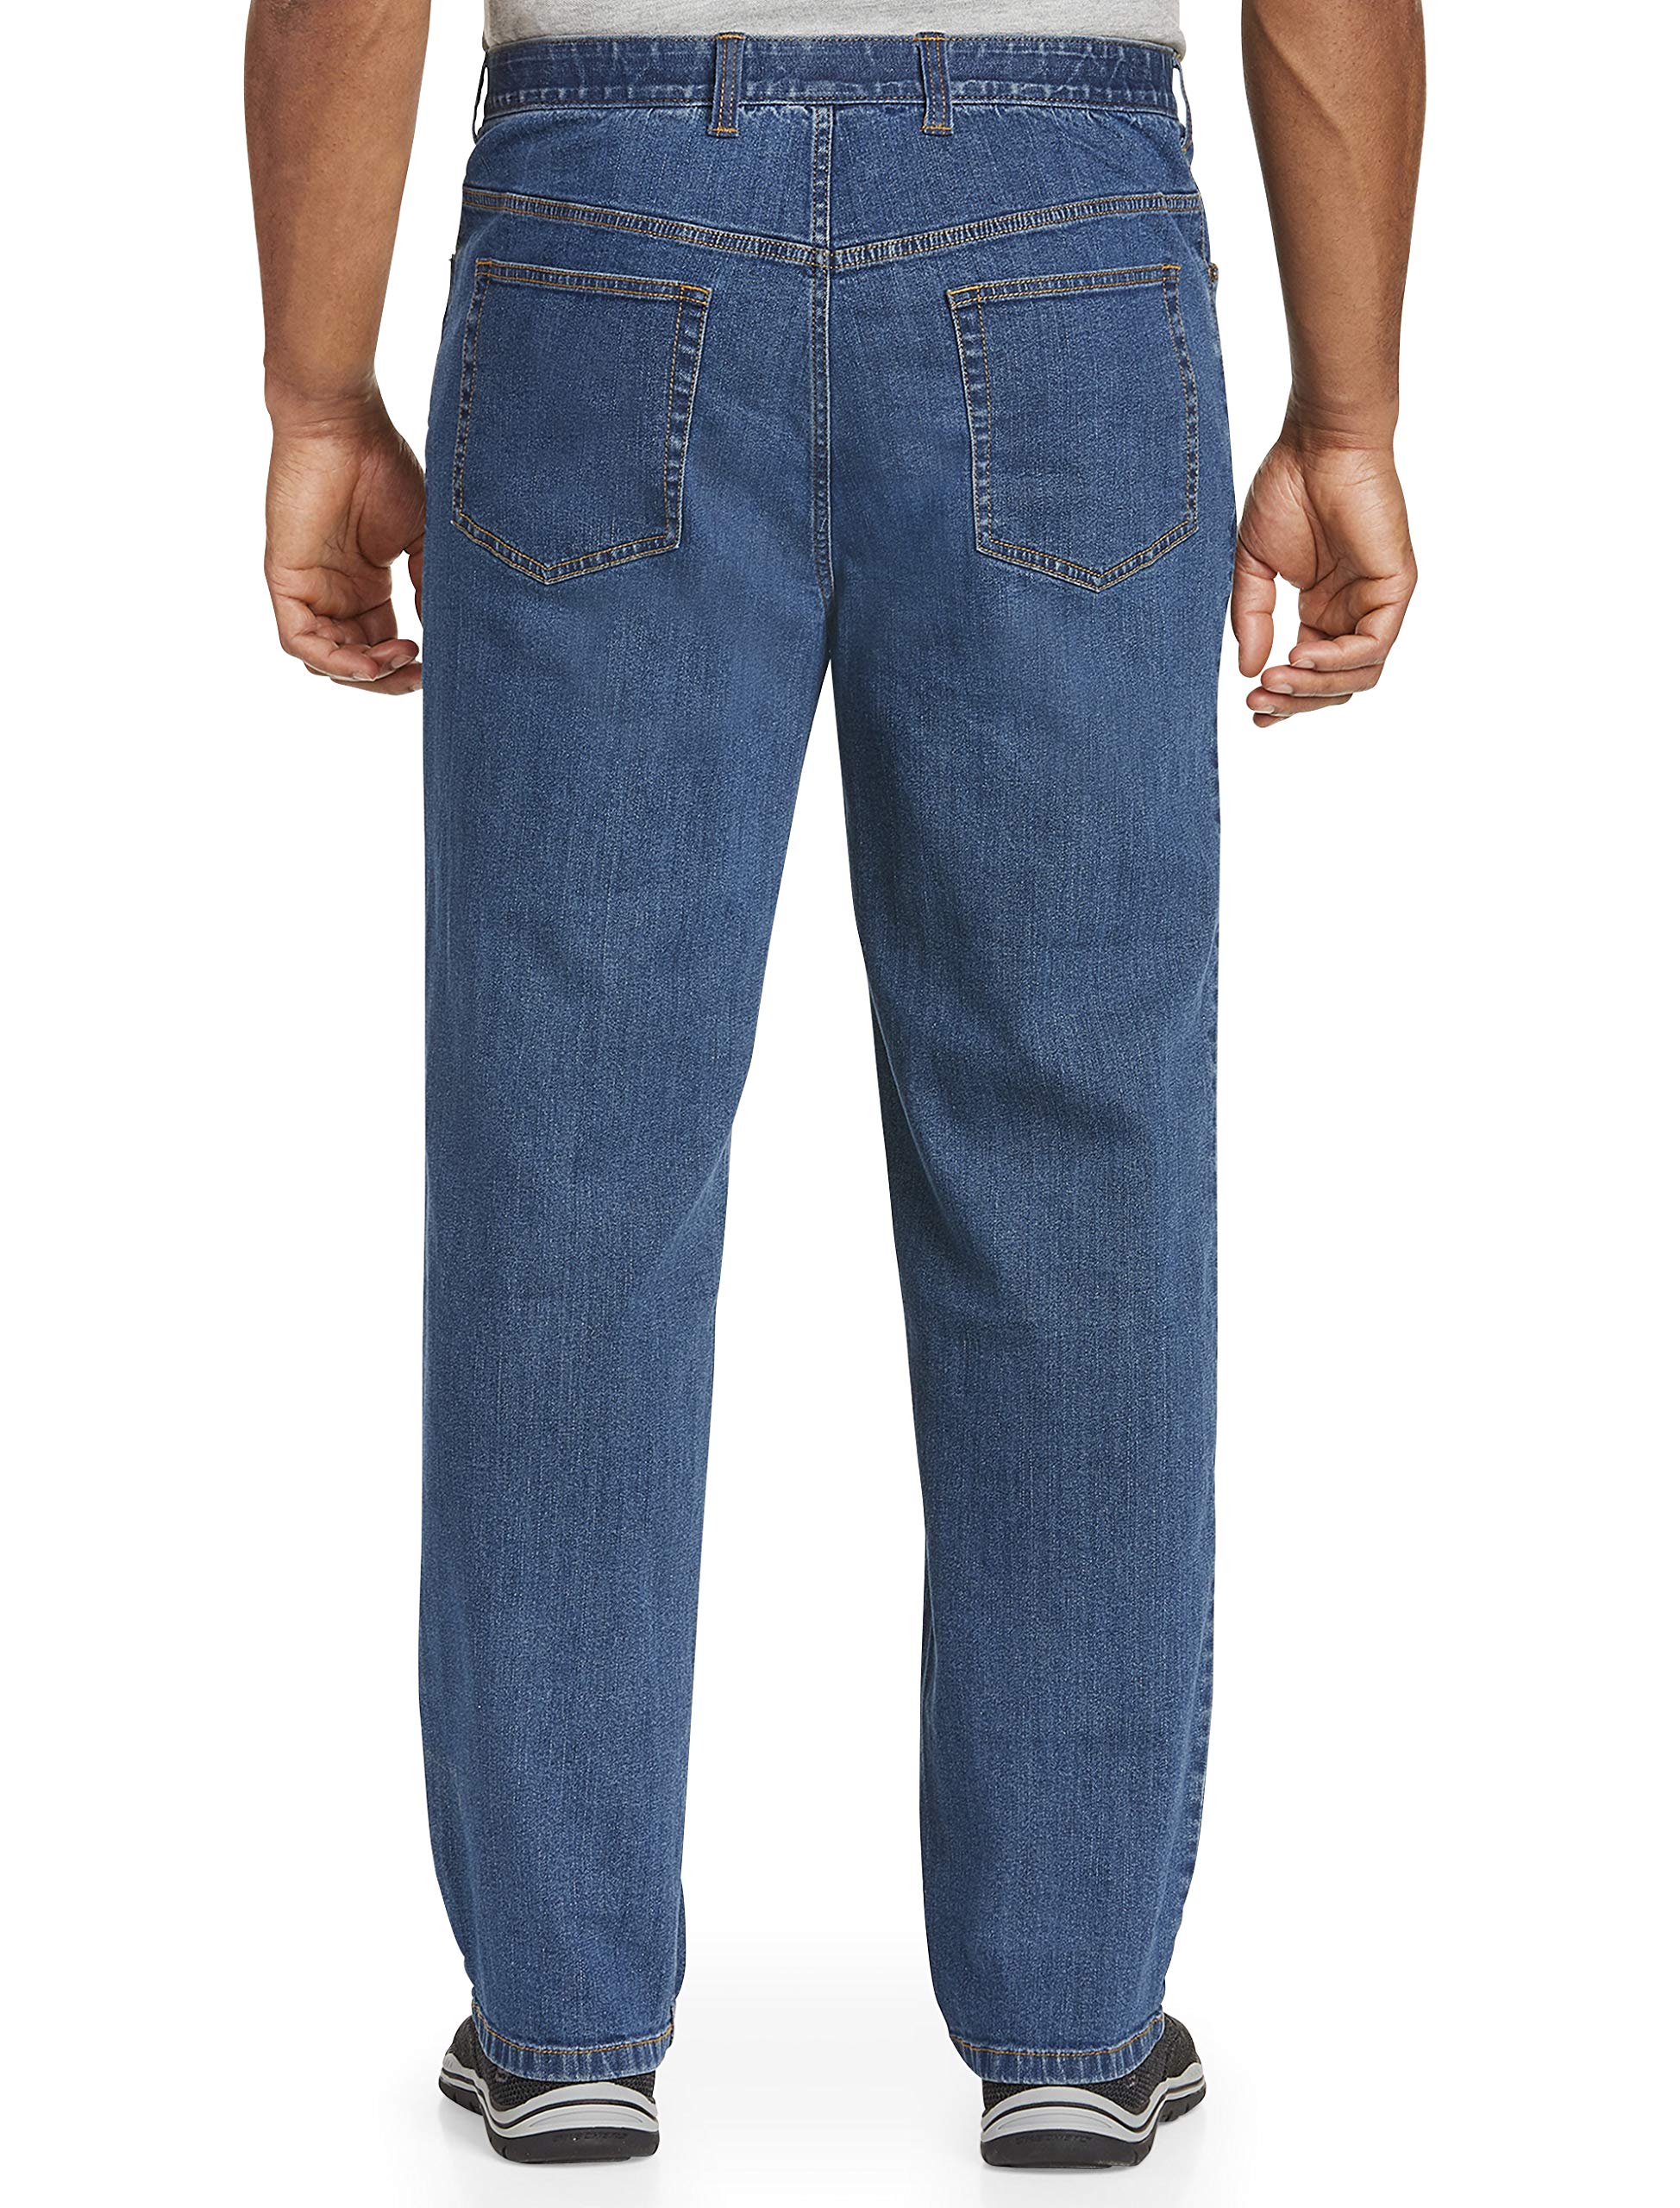 Harbor Bay by DXL Big and Tall Continuous Comfort Stretch Jeans